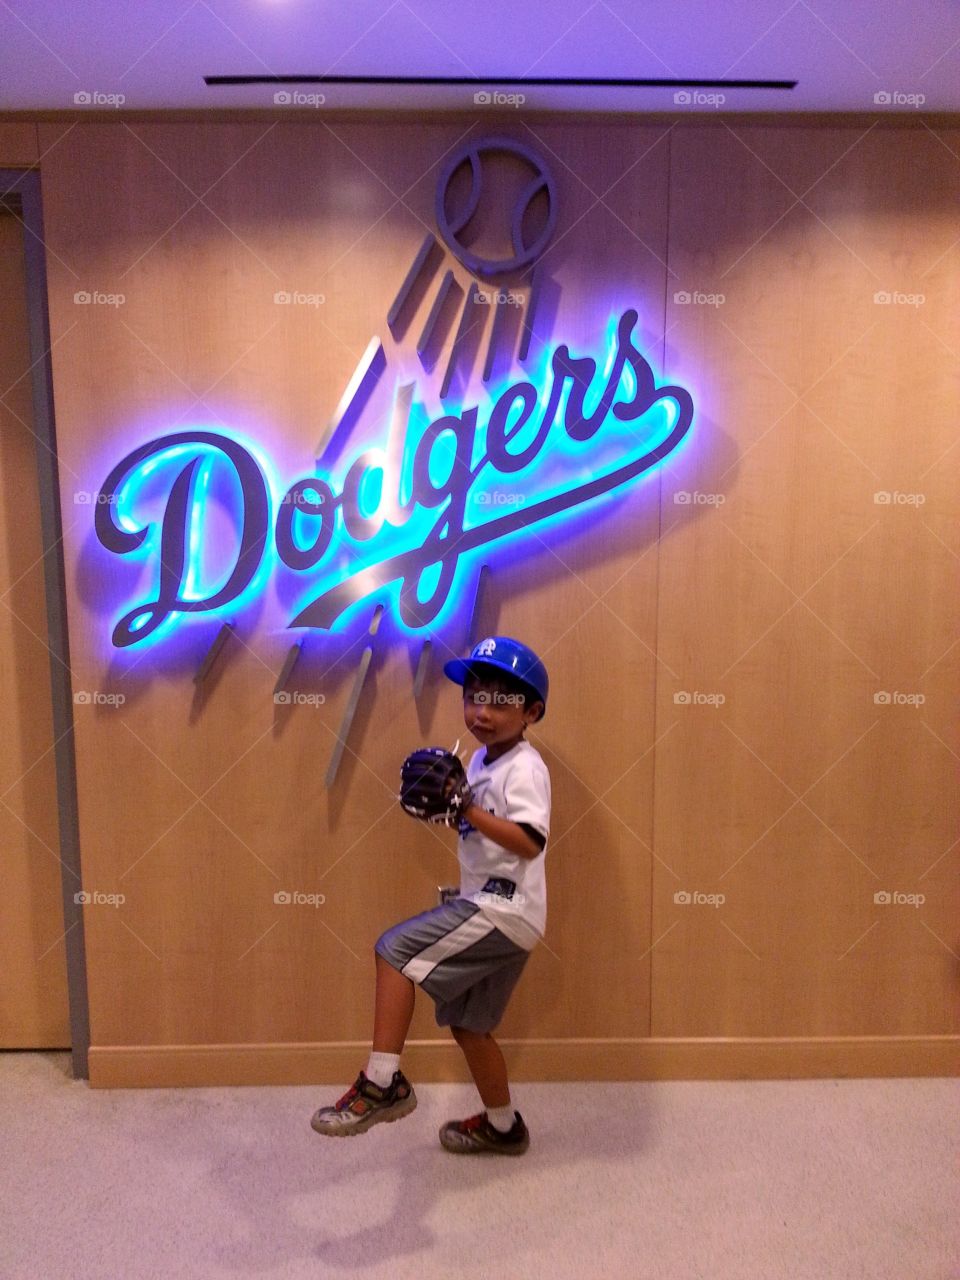 Dodgers clubhouse